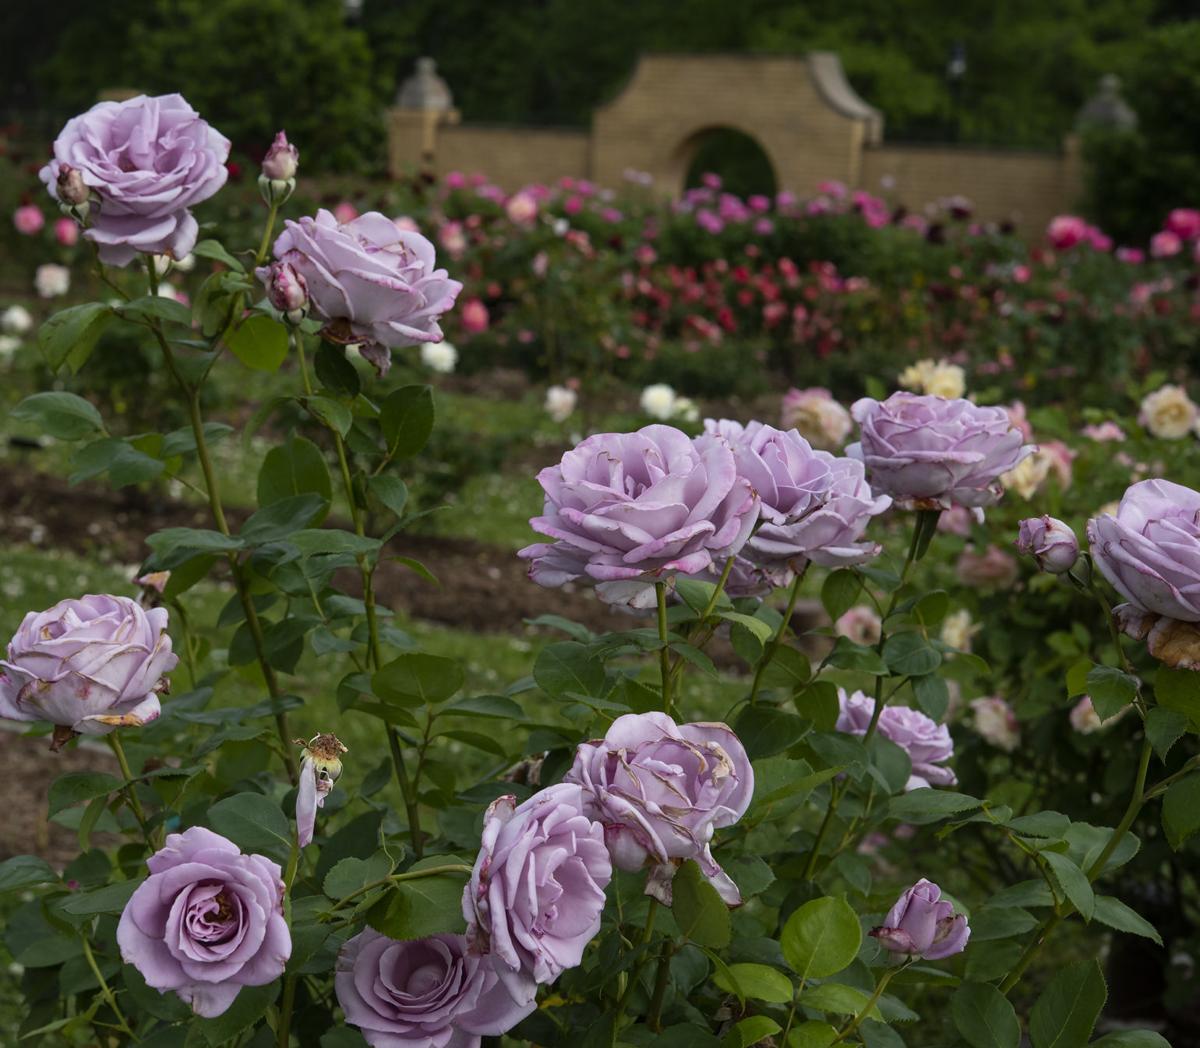 Tyler Rose Garden Added To National Register Of Historic Places